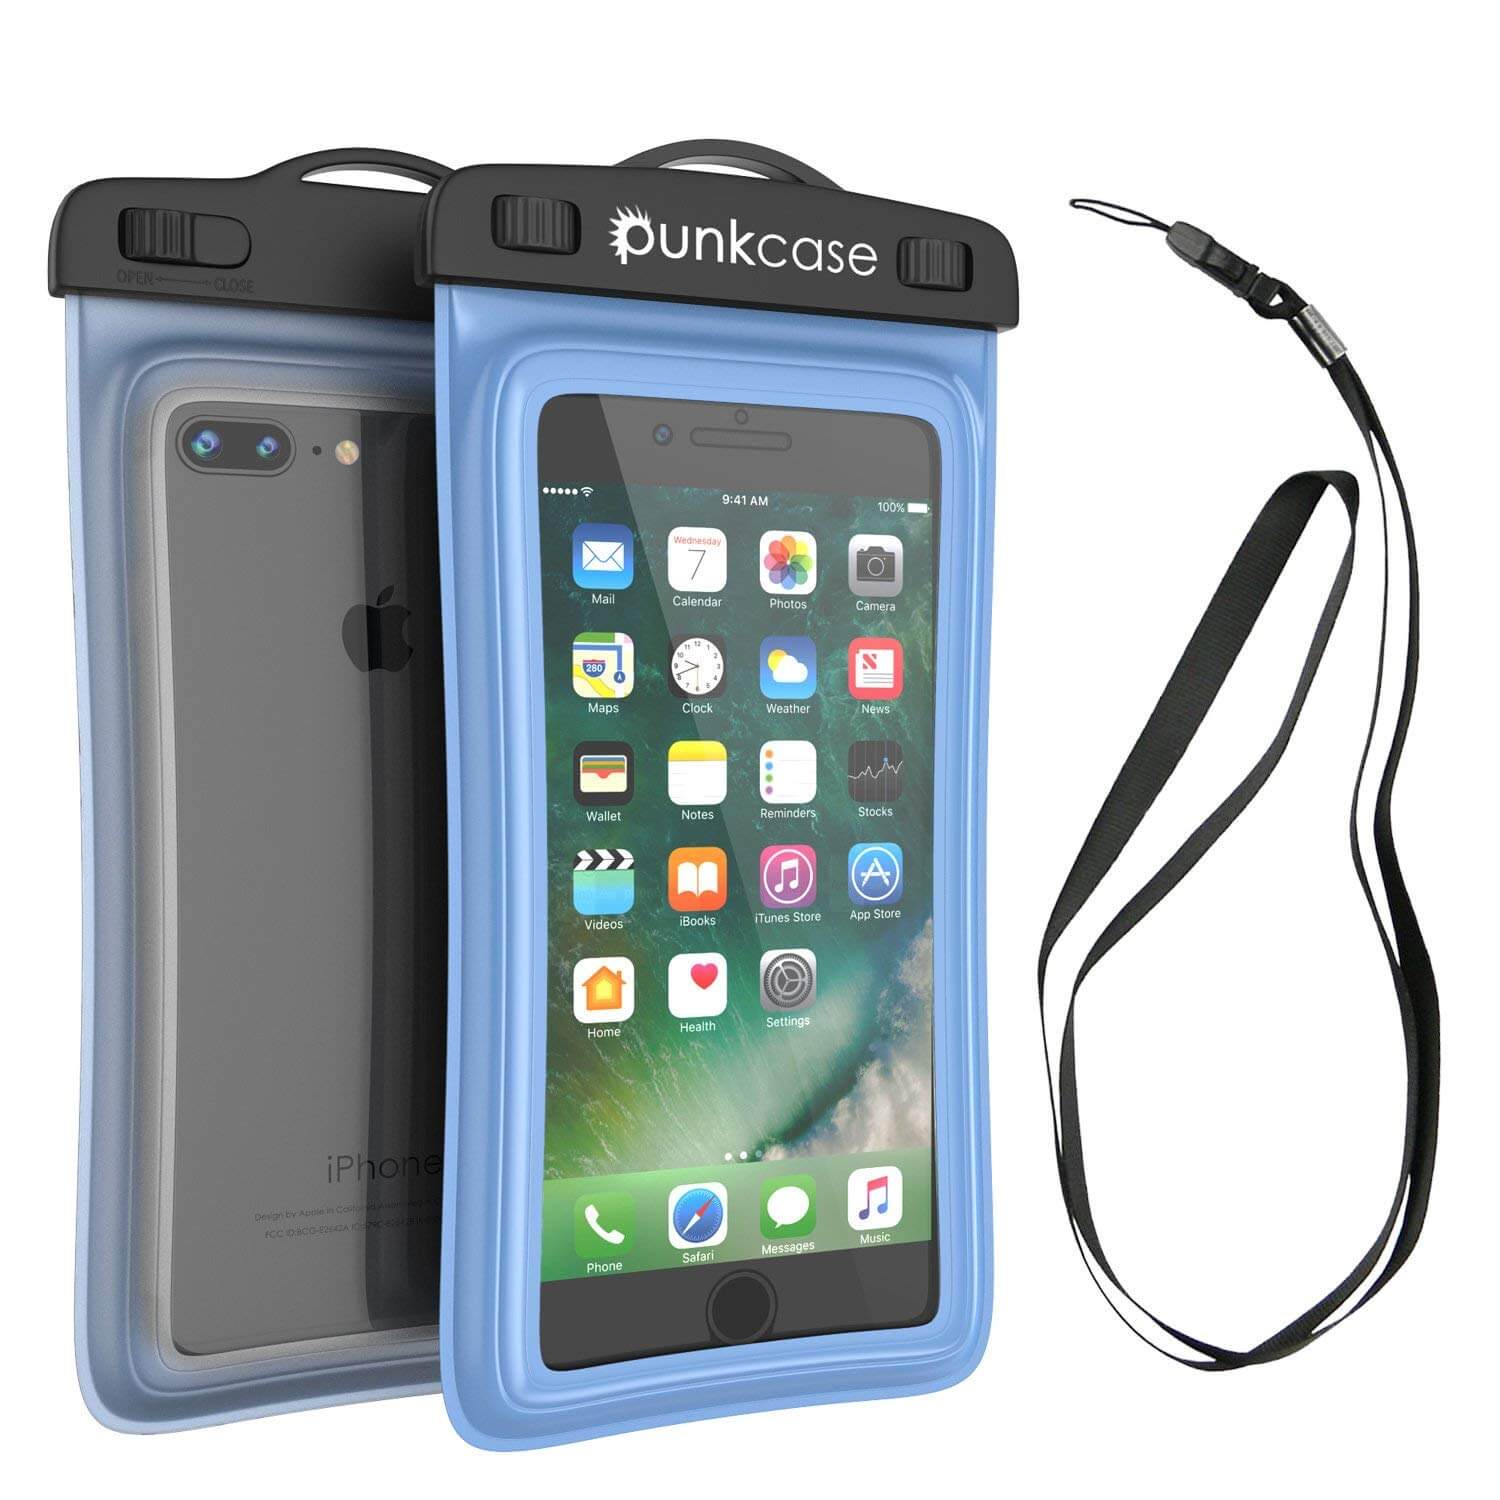 Waterproof Phone Pouch Punkbag Universal Floating Dry Case Bag For Mo Punkcase 